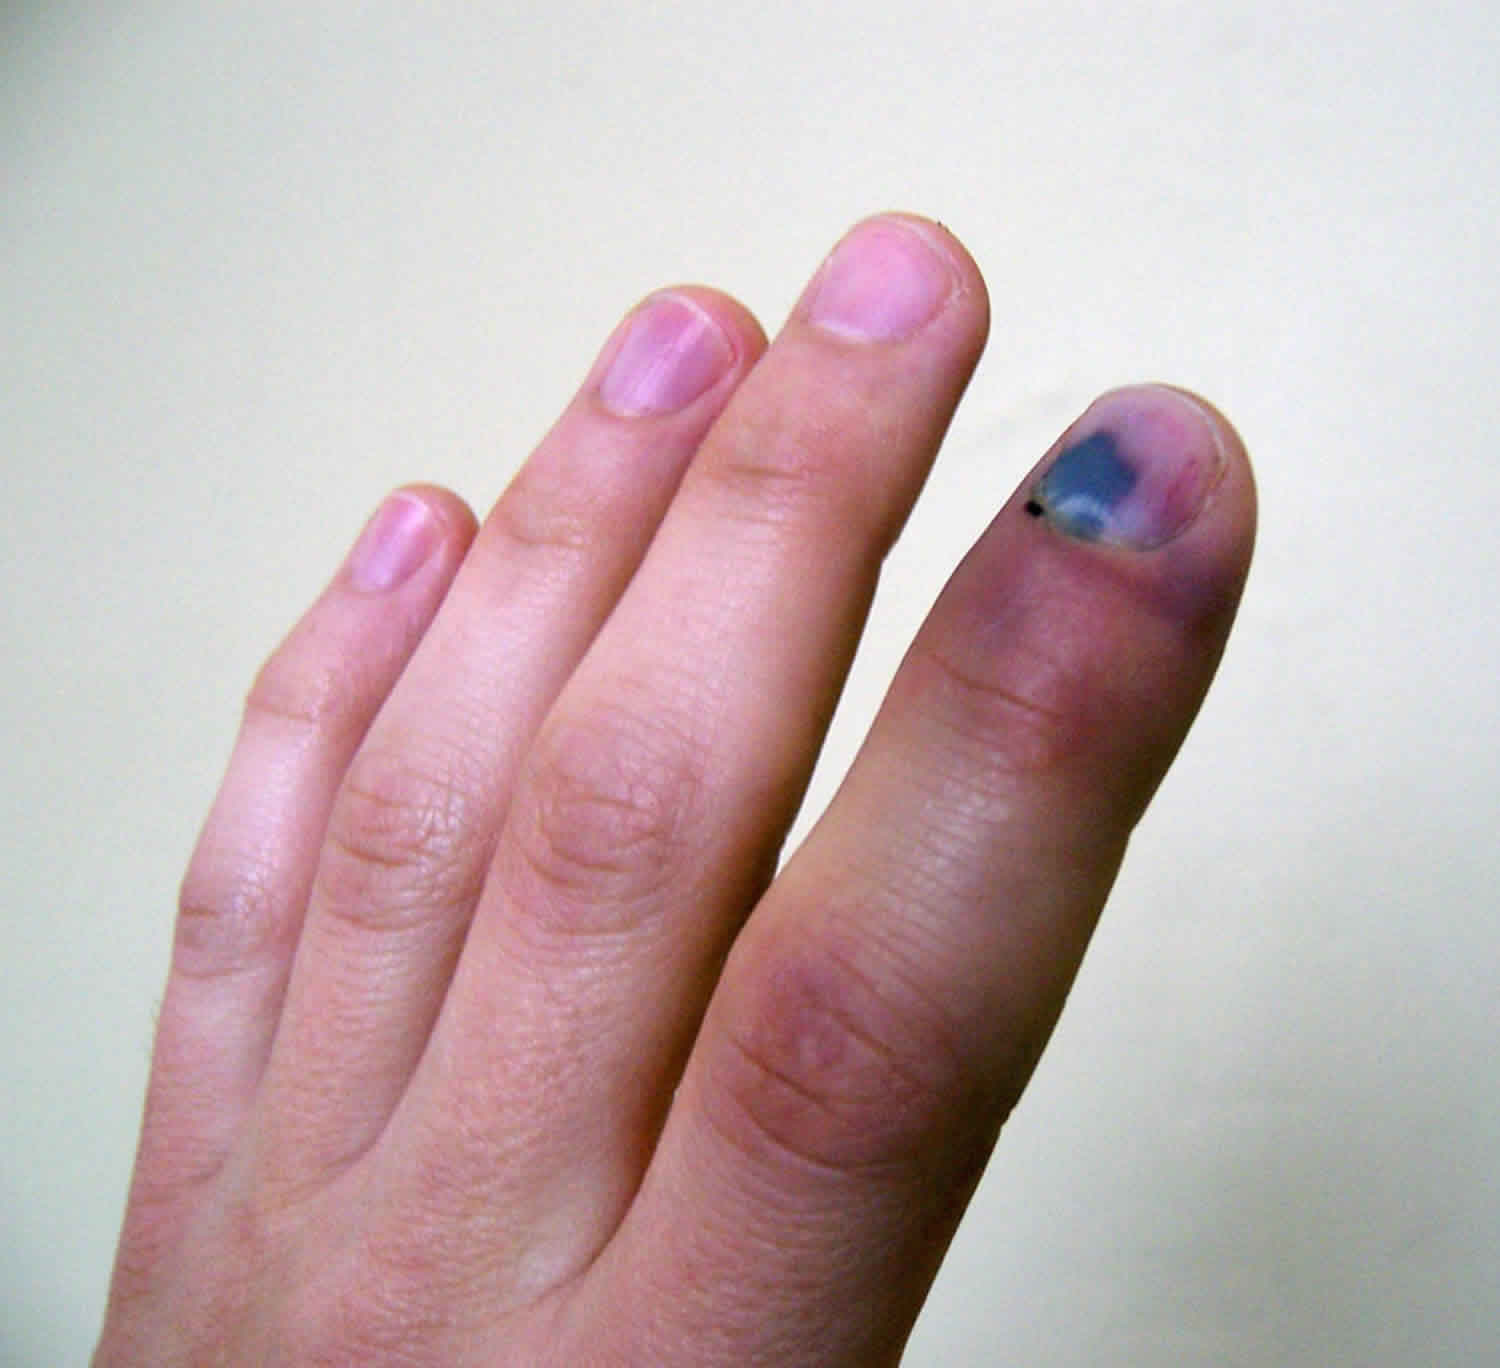 Jammed Finger May Be a Bigger Deal Than You Think - DrBadia.com